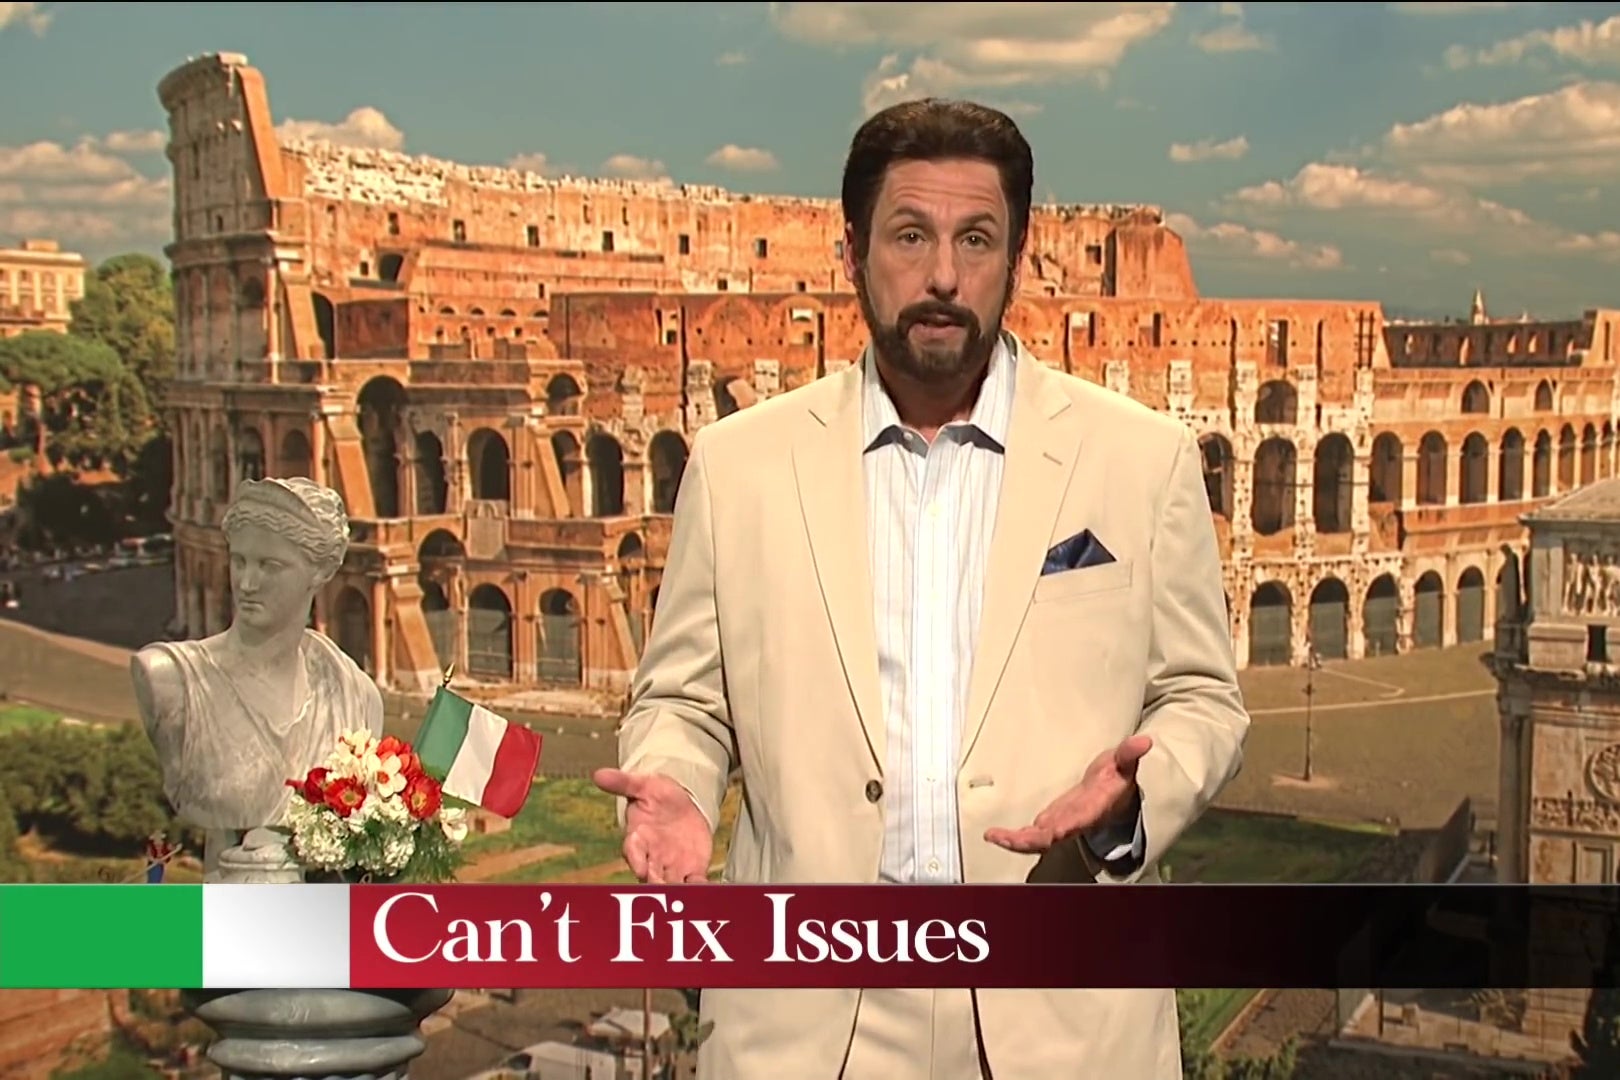 Adam Sandler stands in front of a photo of the Coliseum, above a chyron reading, "Can't Fix Issues."